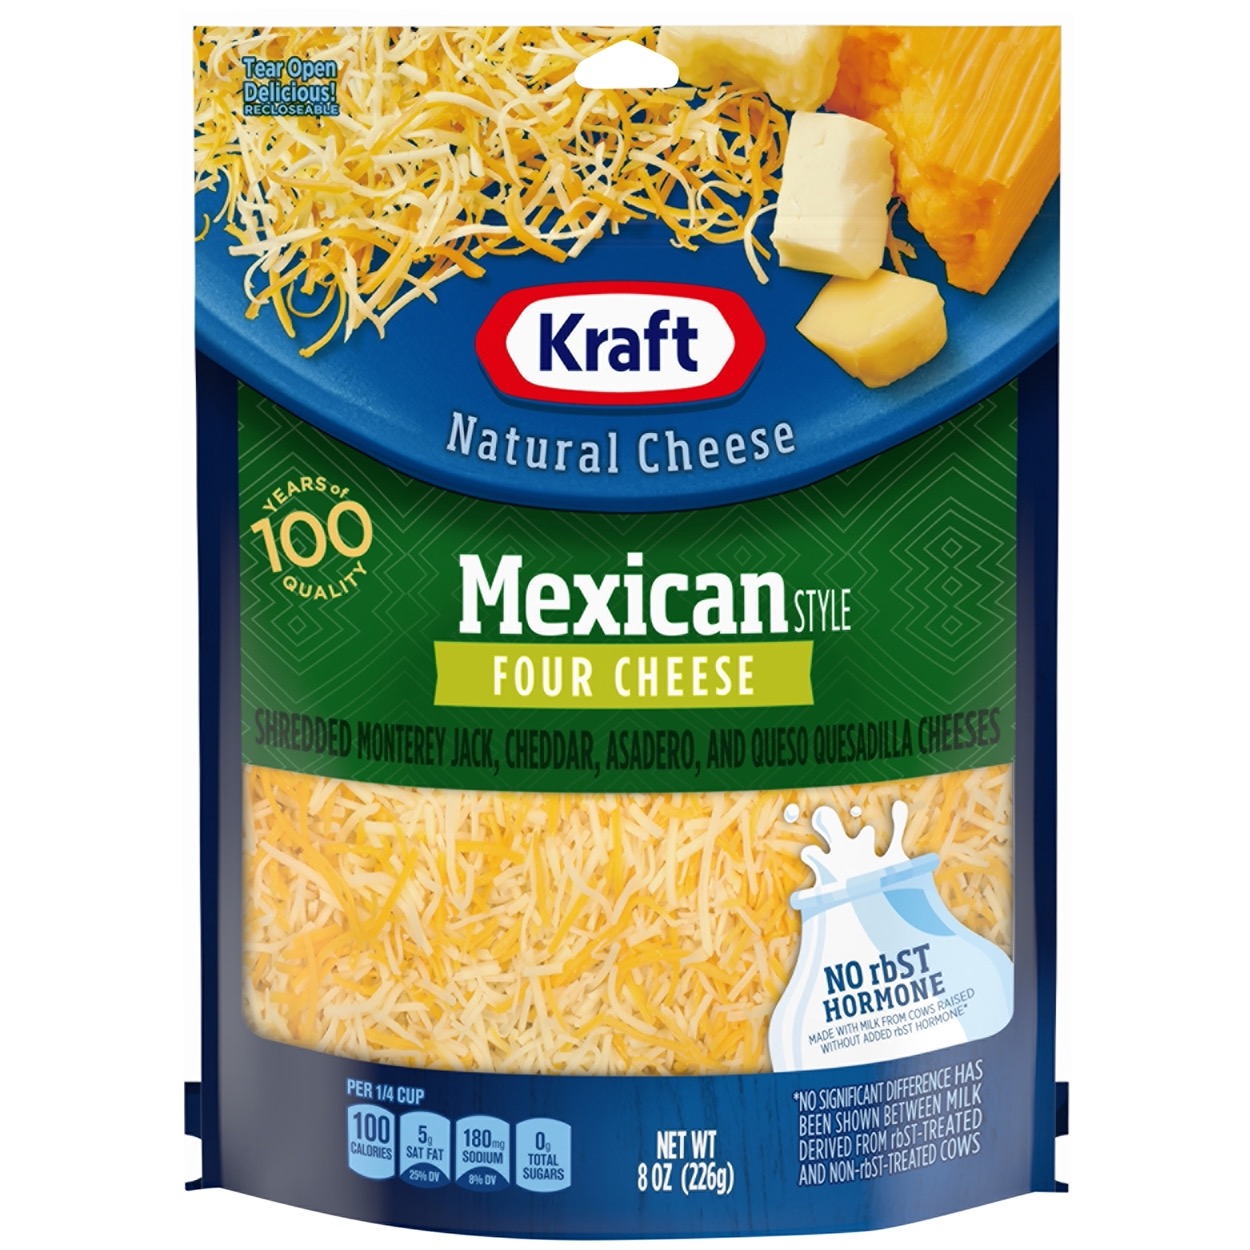 Mexican Style Four Cheese